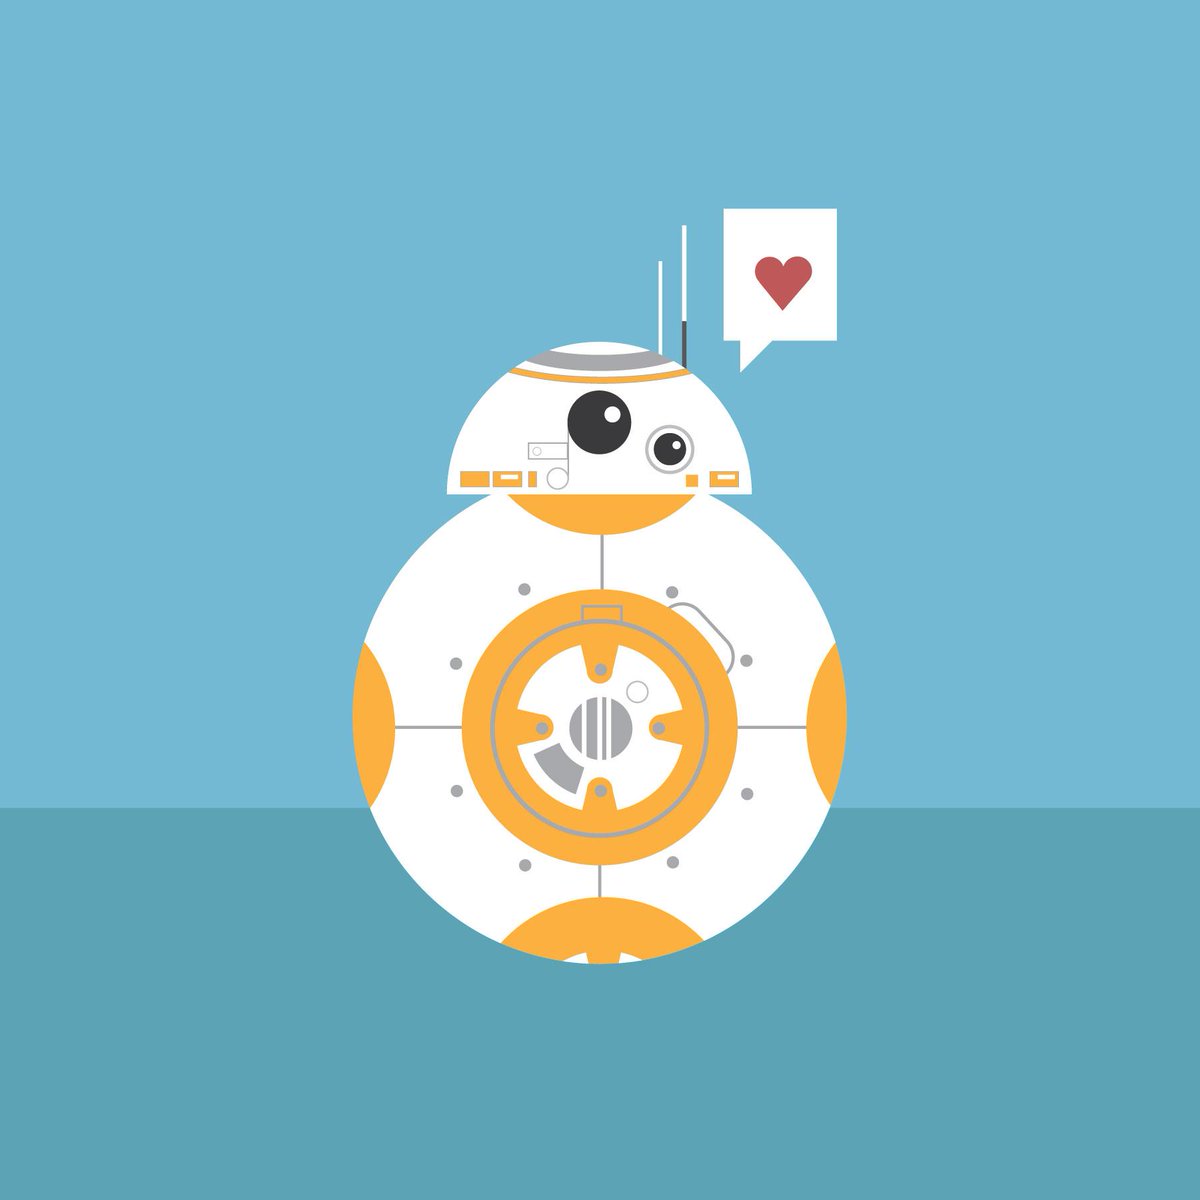 BB-8 wallpaper over in my G+ page...#illustration #vectordoodles.